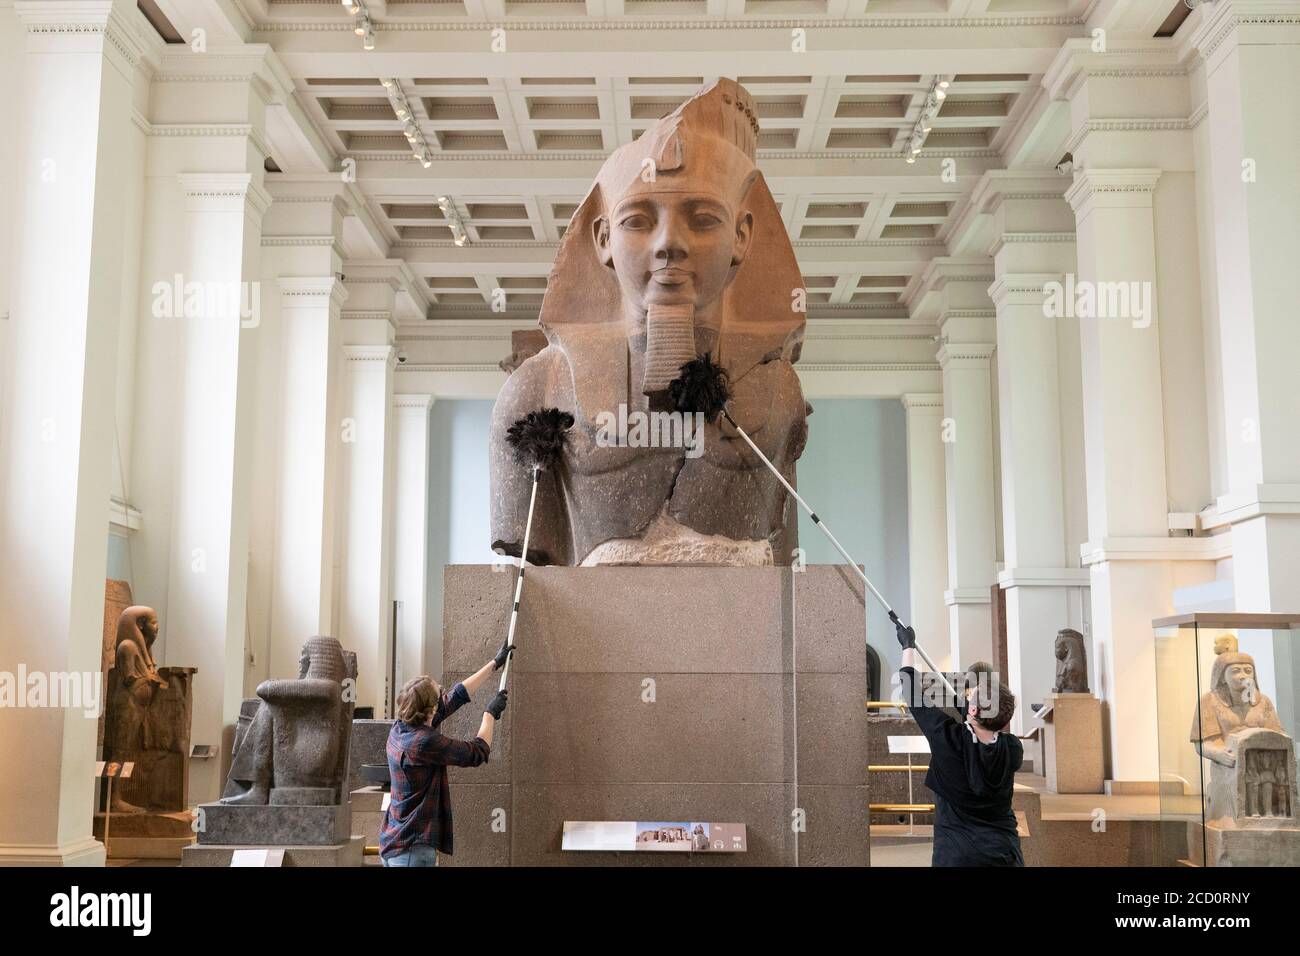 London, England. 25th August 2020. Cleaning staff dust the head of King Ramesses at the British Museum. The British Museum will reopen it’s doors to the public in line with government guidelines and with new safety measures in place. Following five months of closure due to the coronavirus pandemic, the British Museum will be re-opening it’s doors to the public on the 27th August 2020. A new one-way route round the ground floor galleries will allow visitors access to over 9000 objects. More galleries will reopen later in September. (photo by Sam Mellish / Alamy Live News) Stock Photo